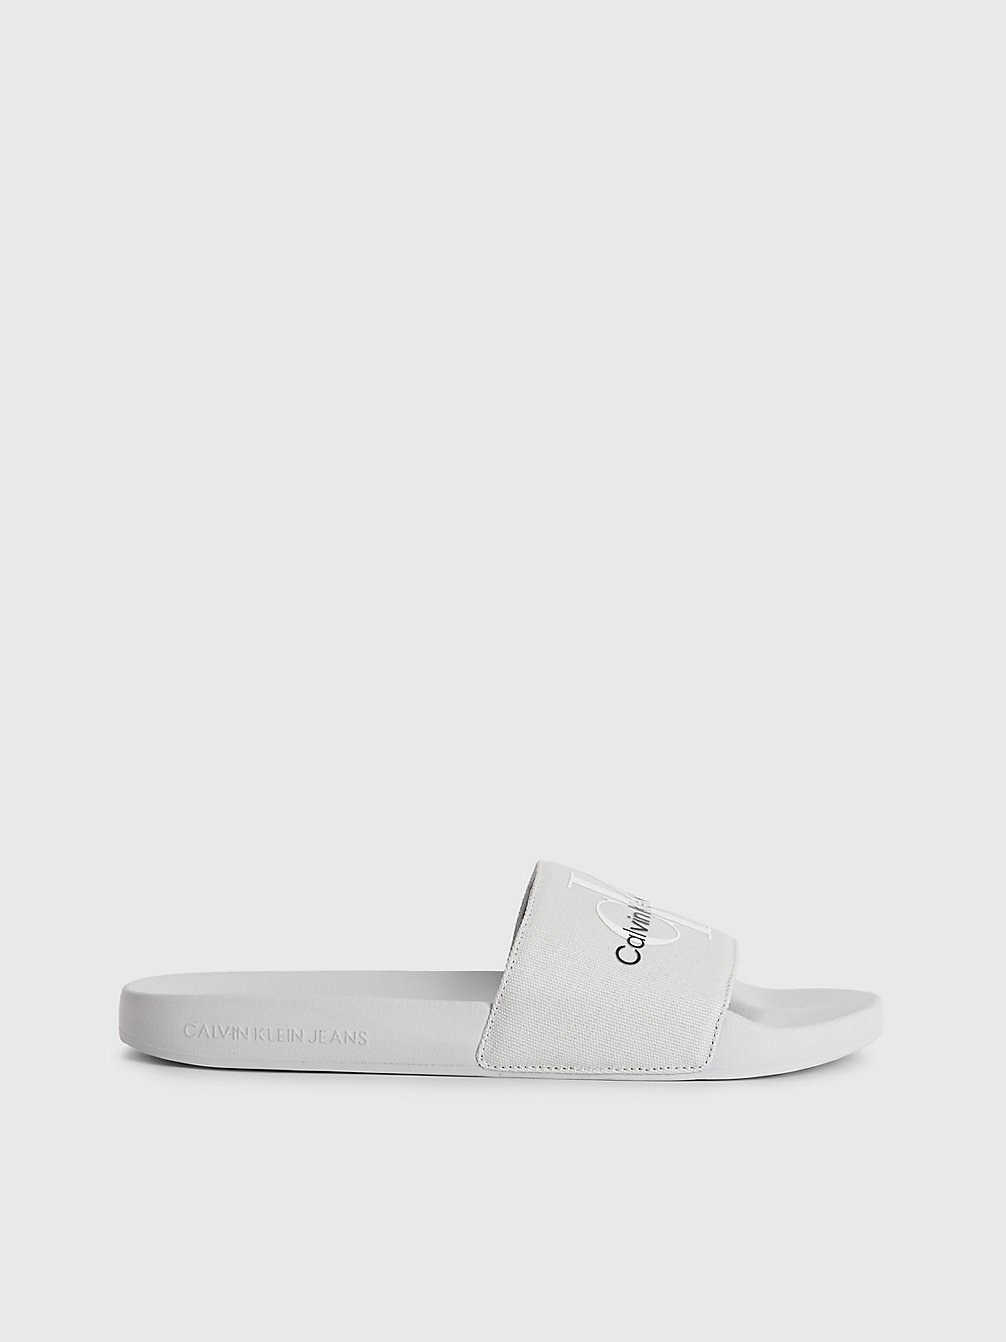 OYSTER MUSHROOM Recycled Canvas Sliders undefined men Calvin Klein